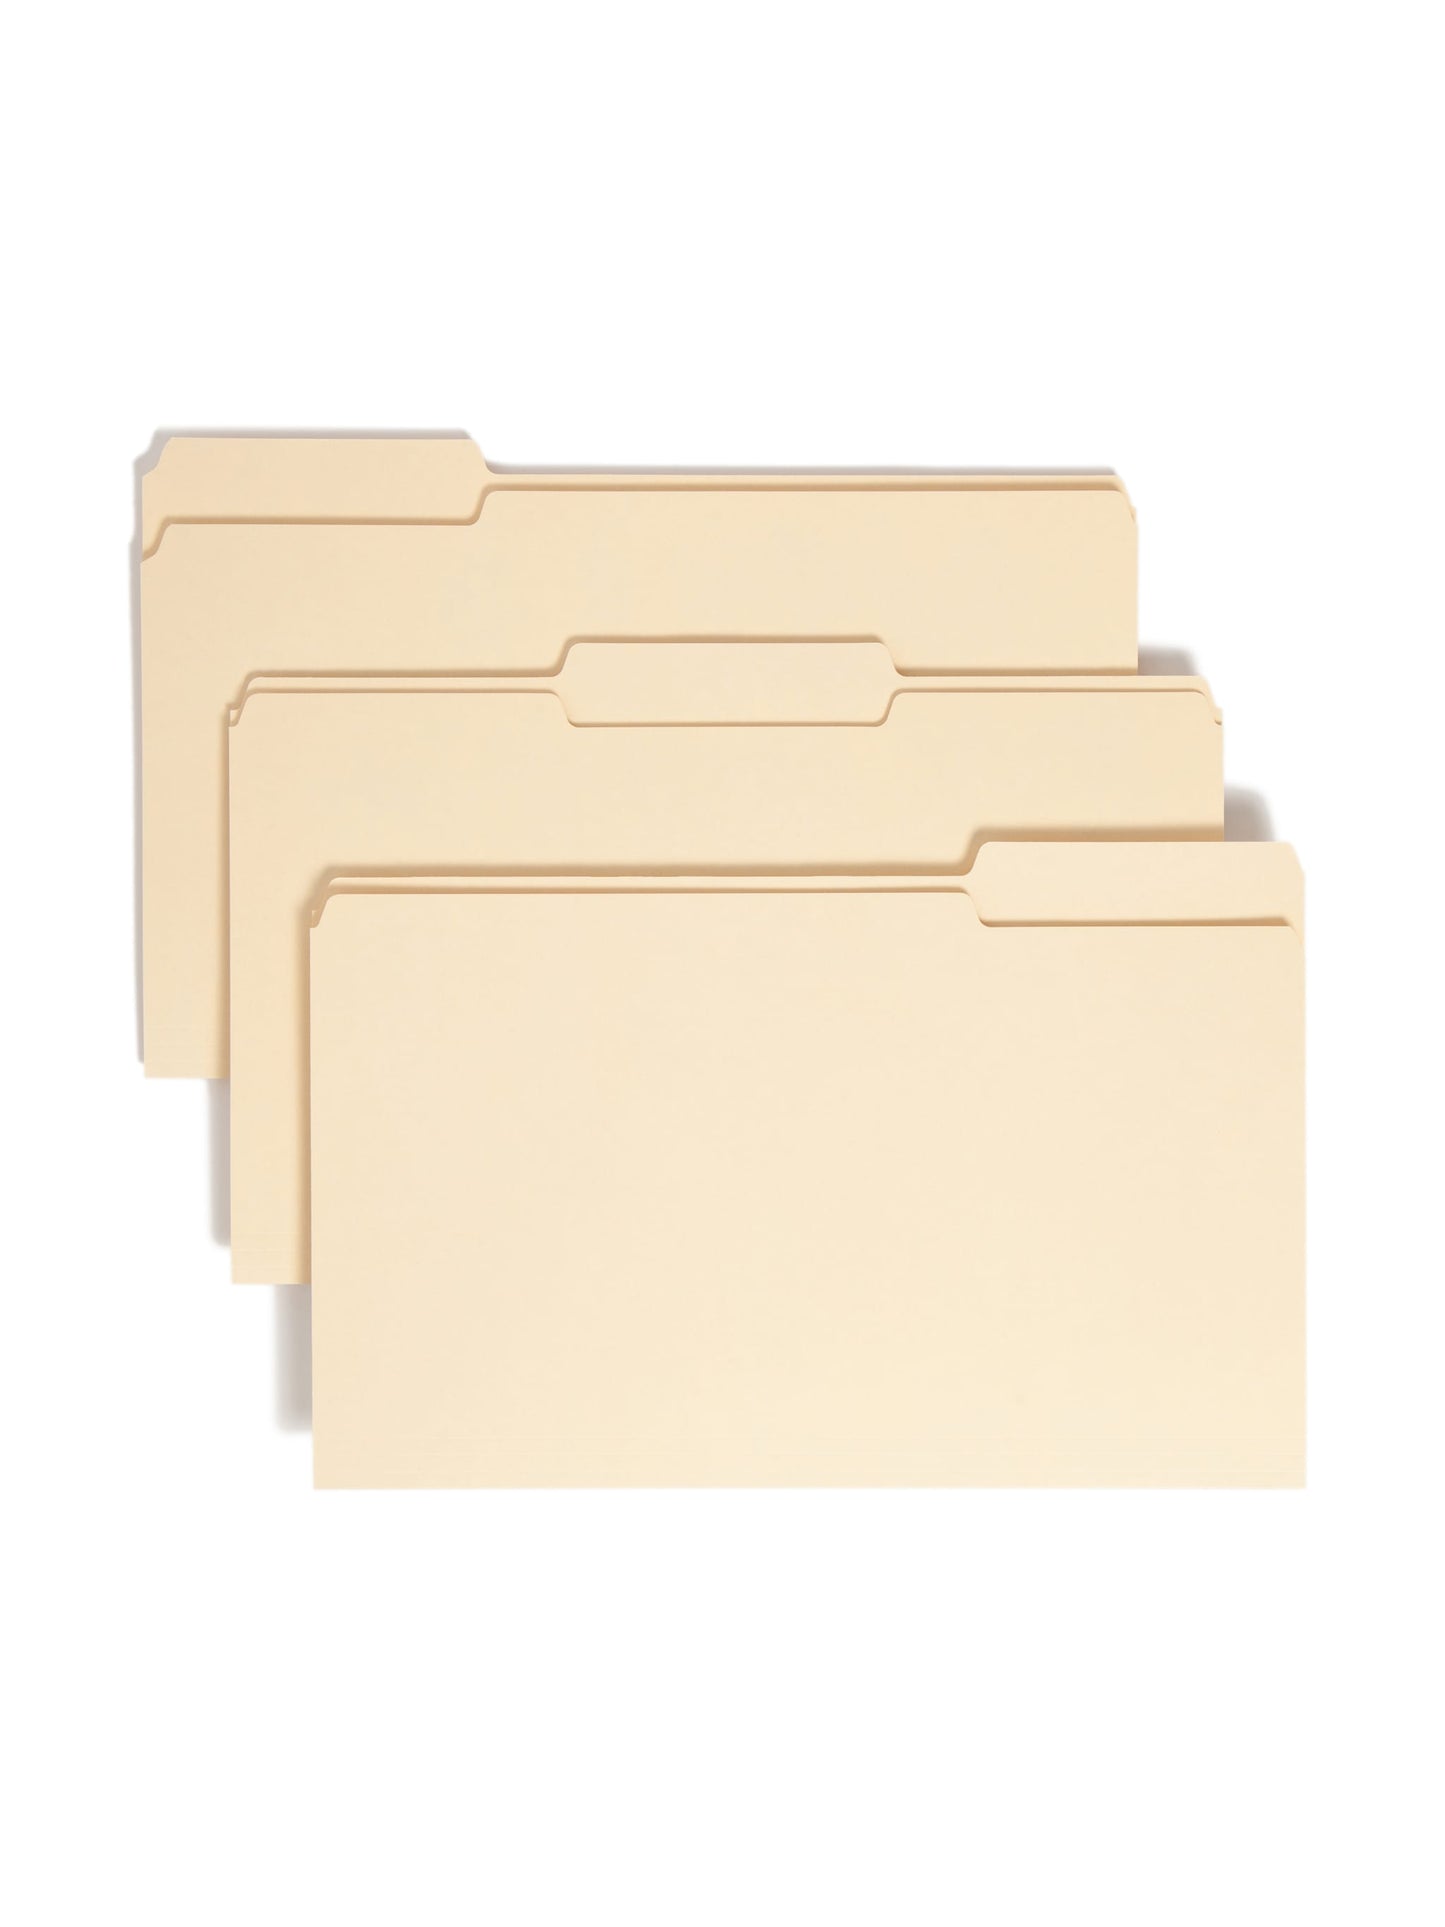 100% Recycled File Folders, Manila Color, Legal Size, Set of 100, 086486153393